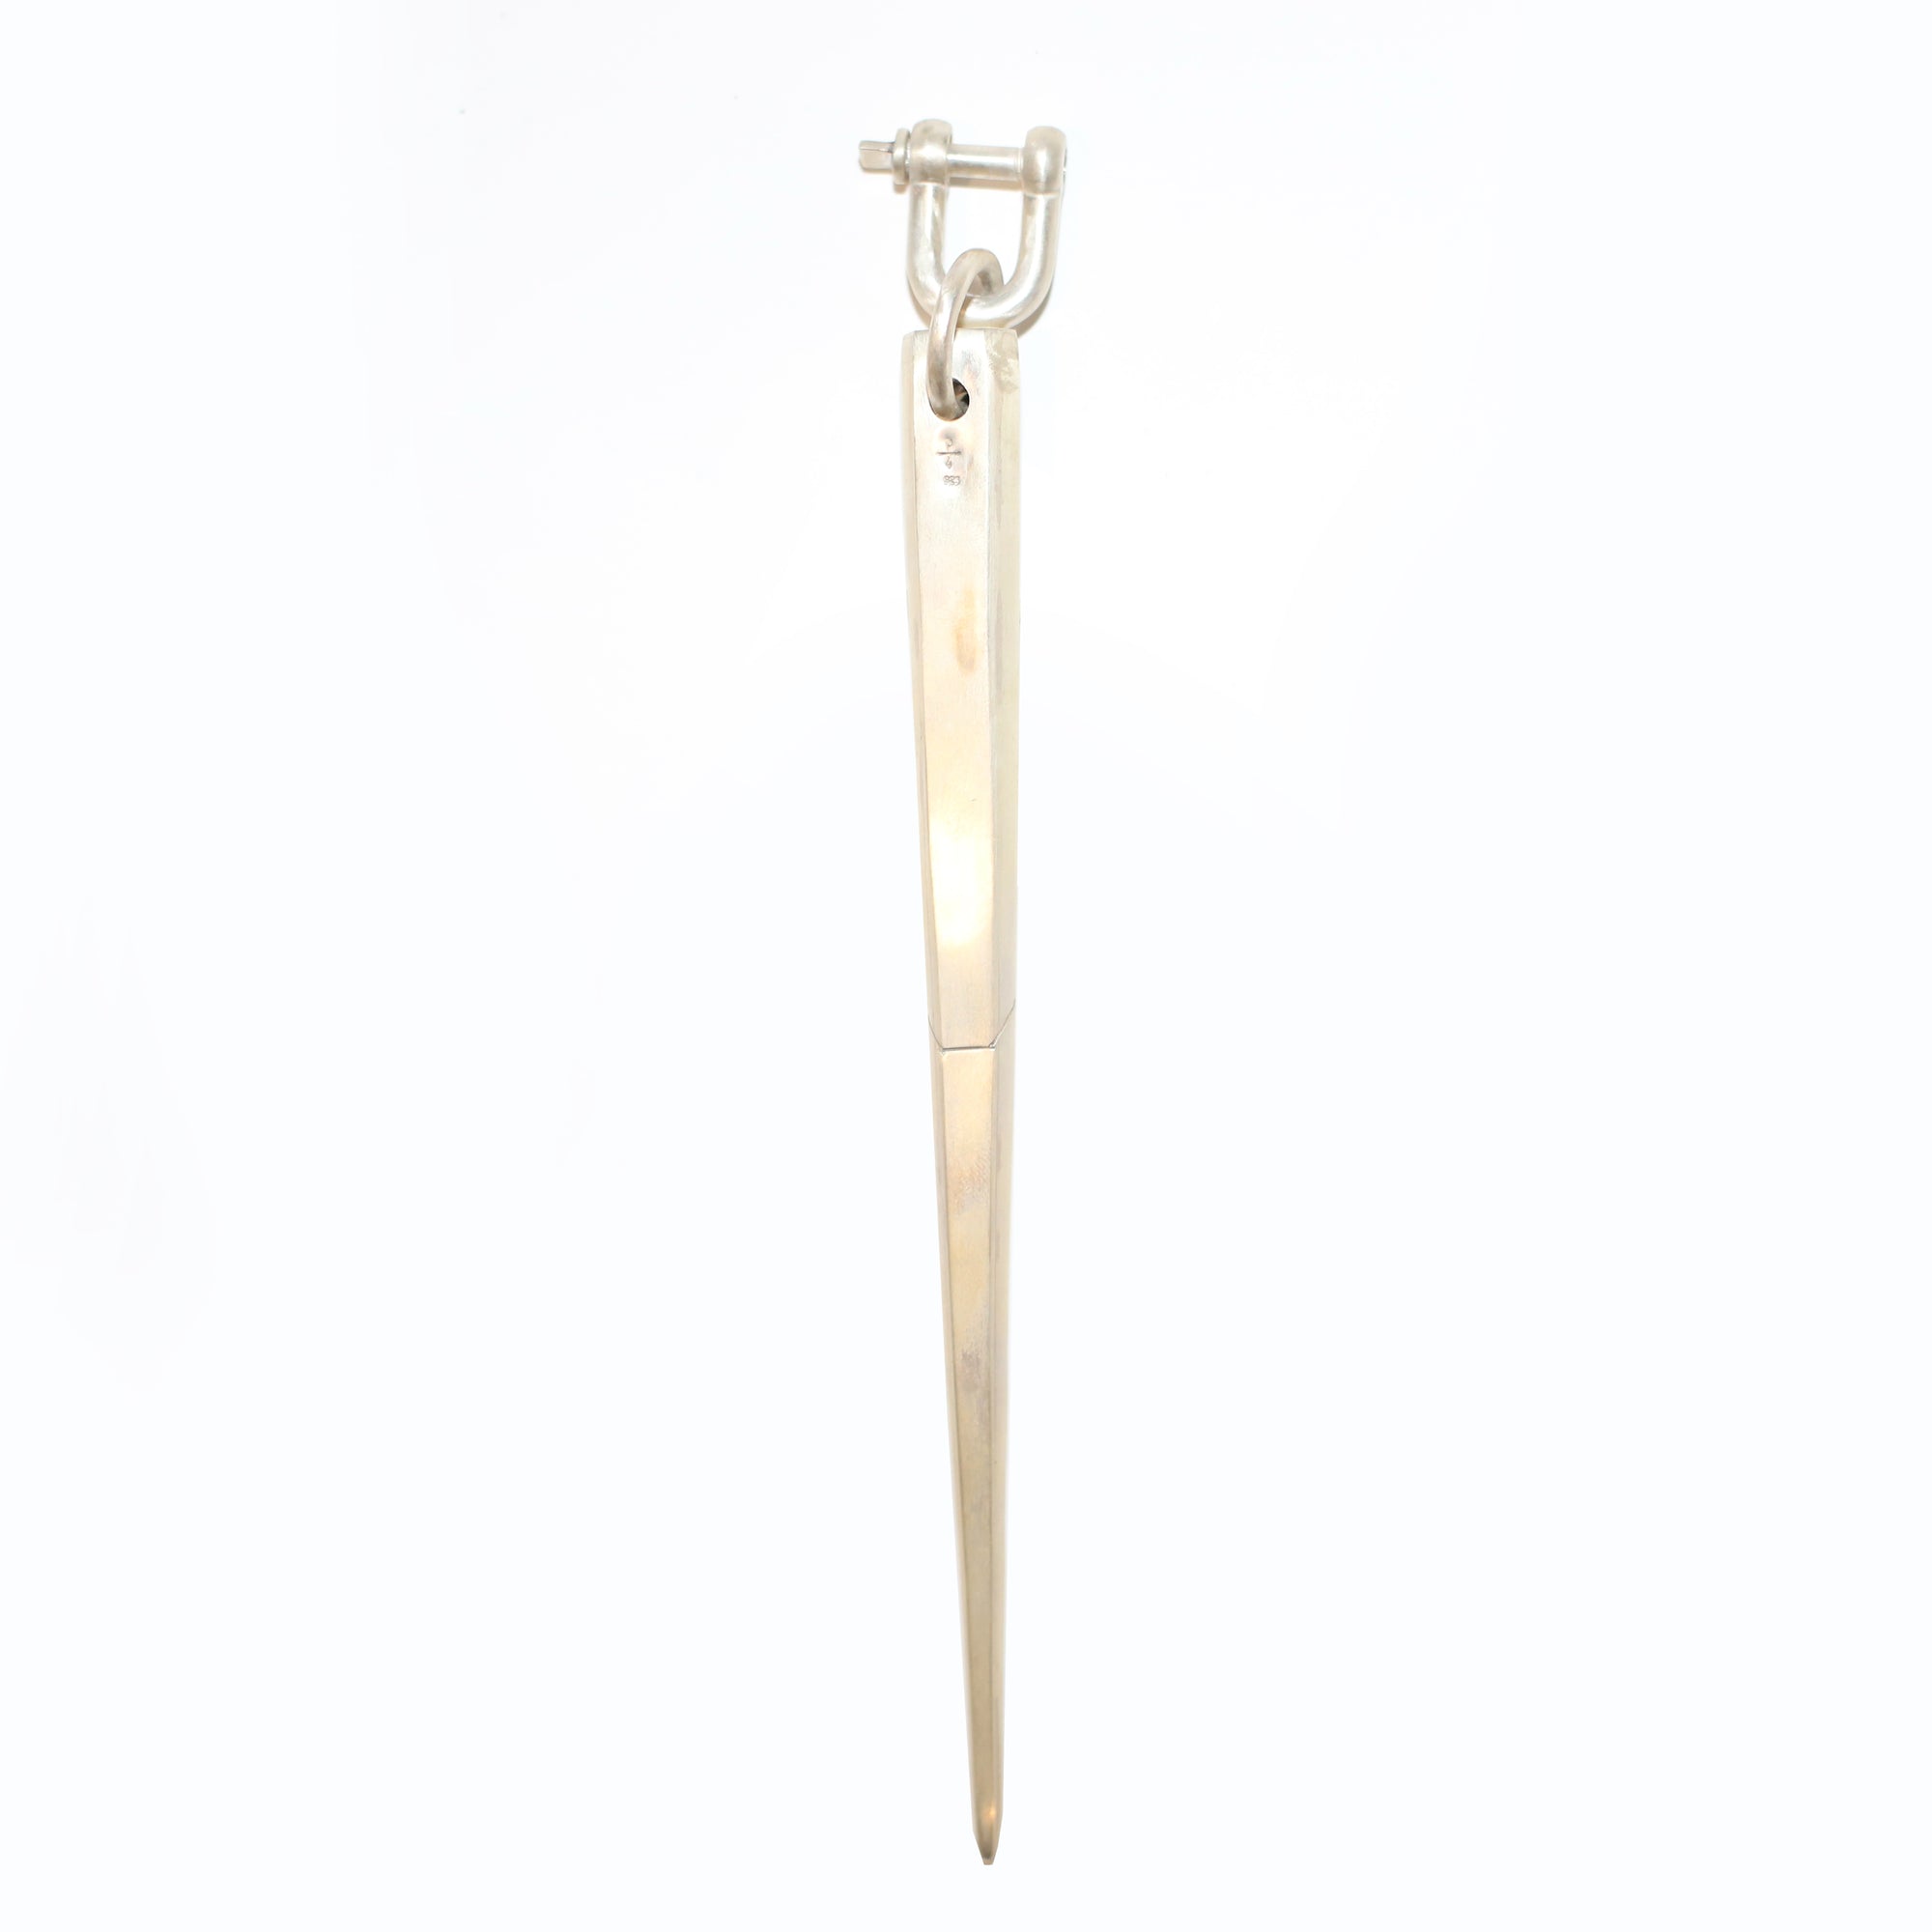 Giant spike charm by Parts of 4 - matte white bronze